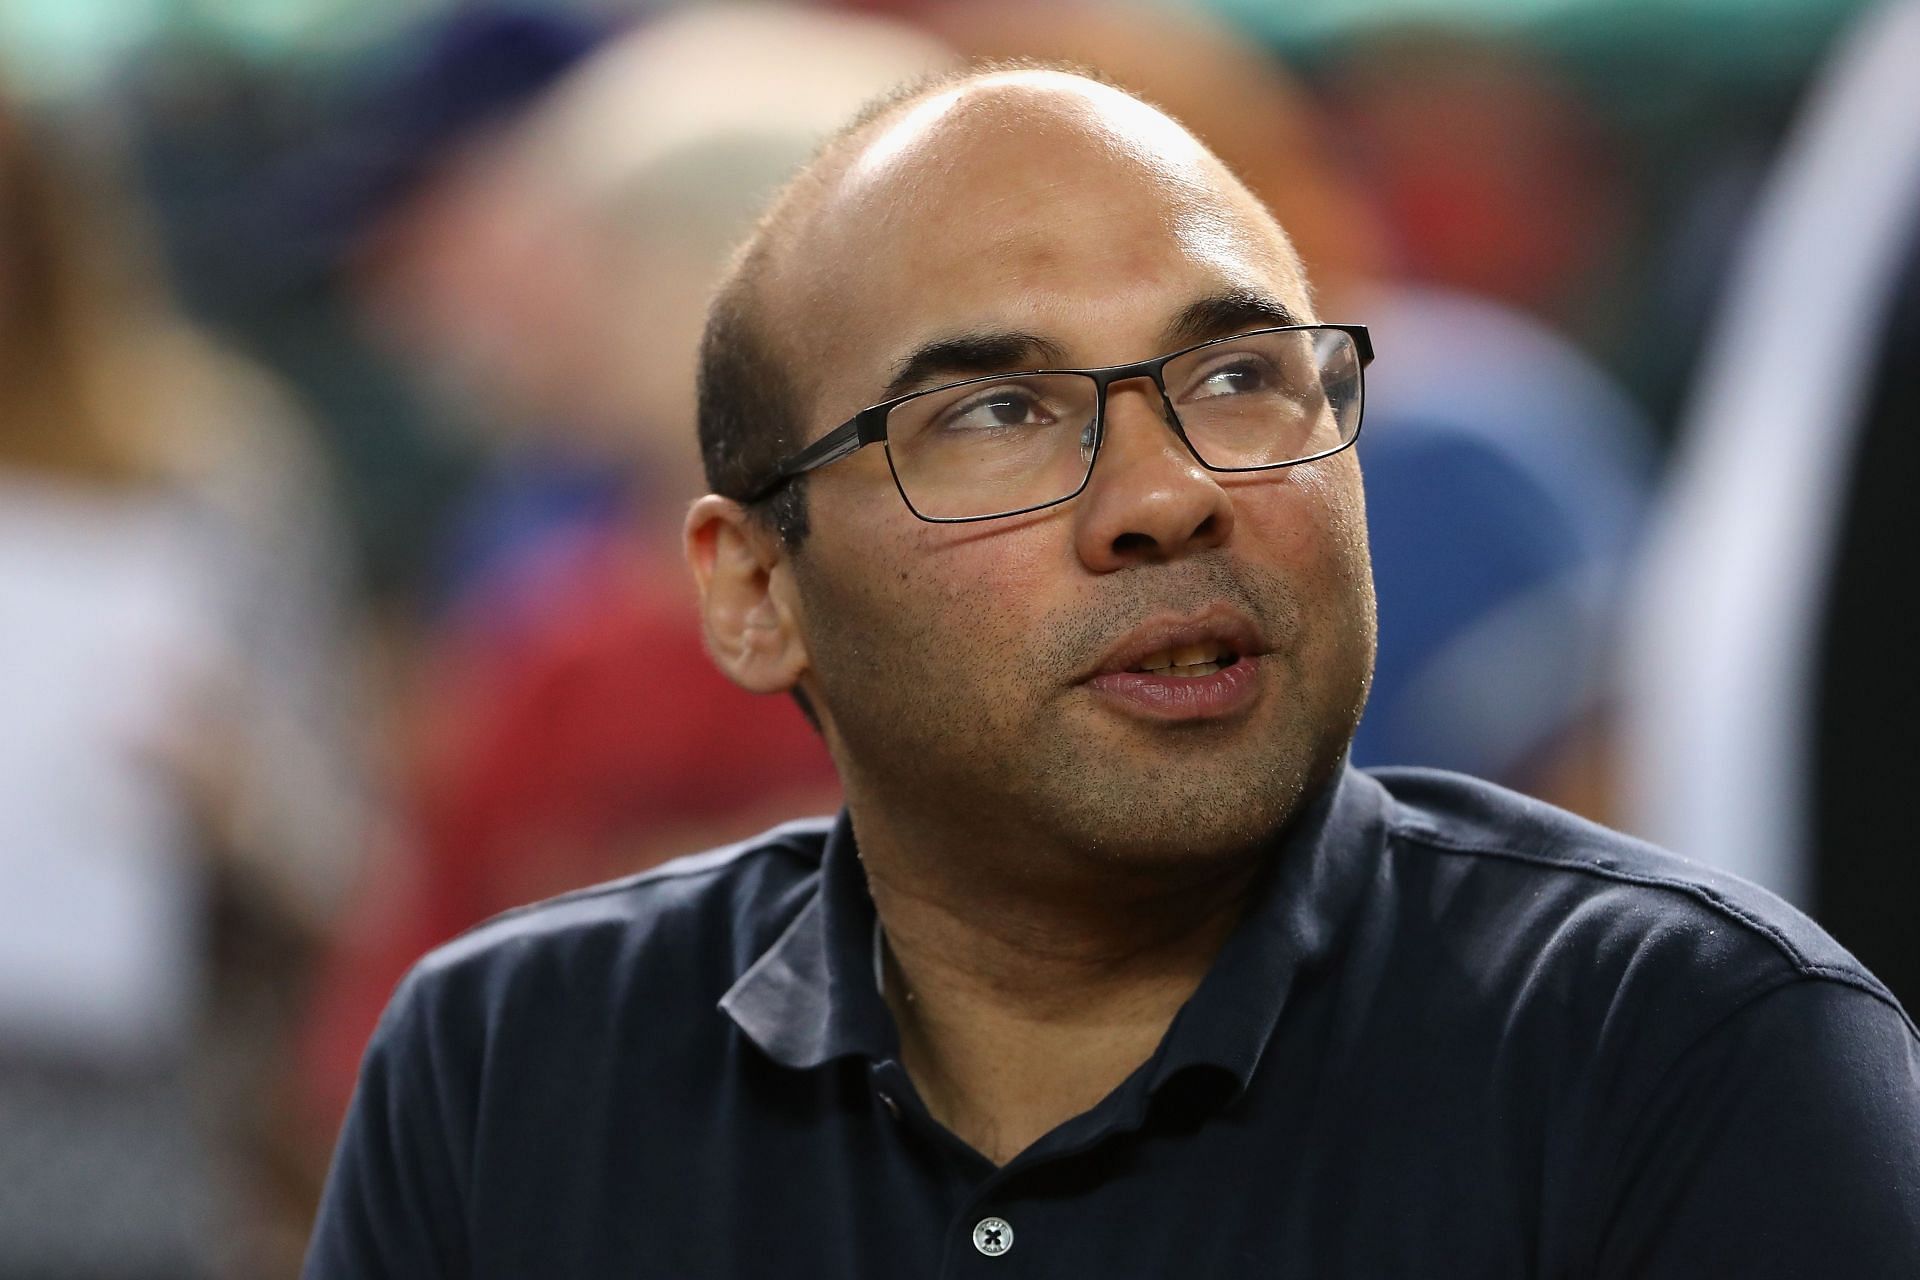 SF Giants' Zaidi supports Pride event: 'This is not a political issue